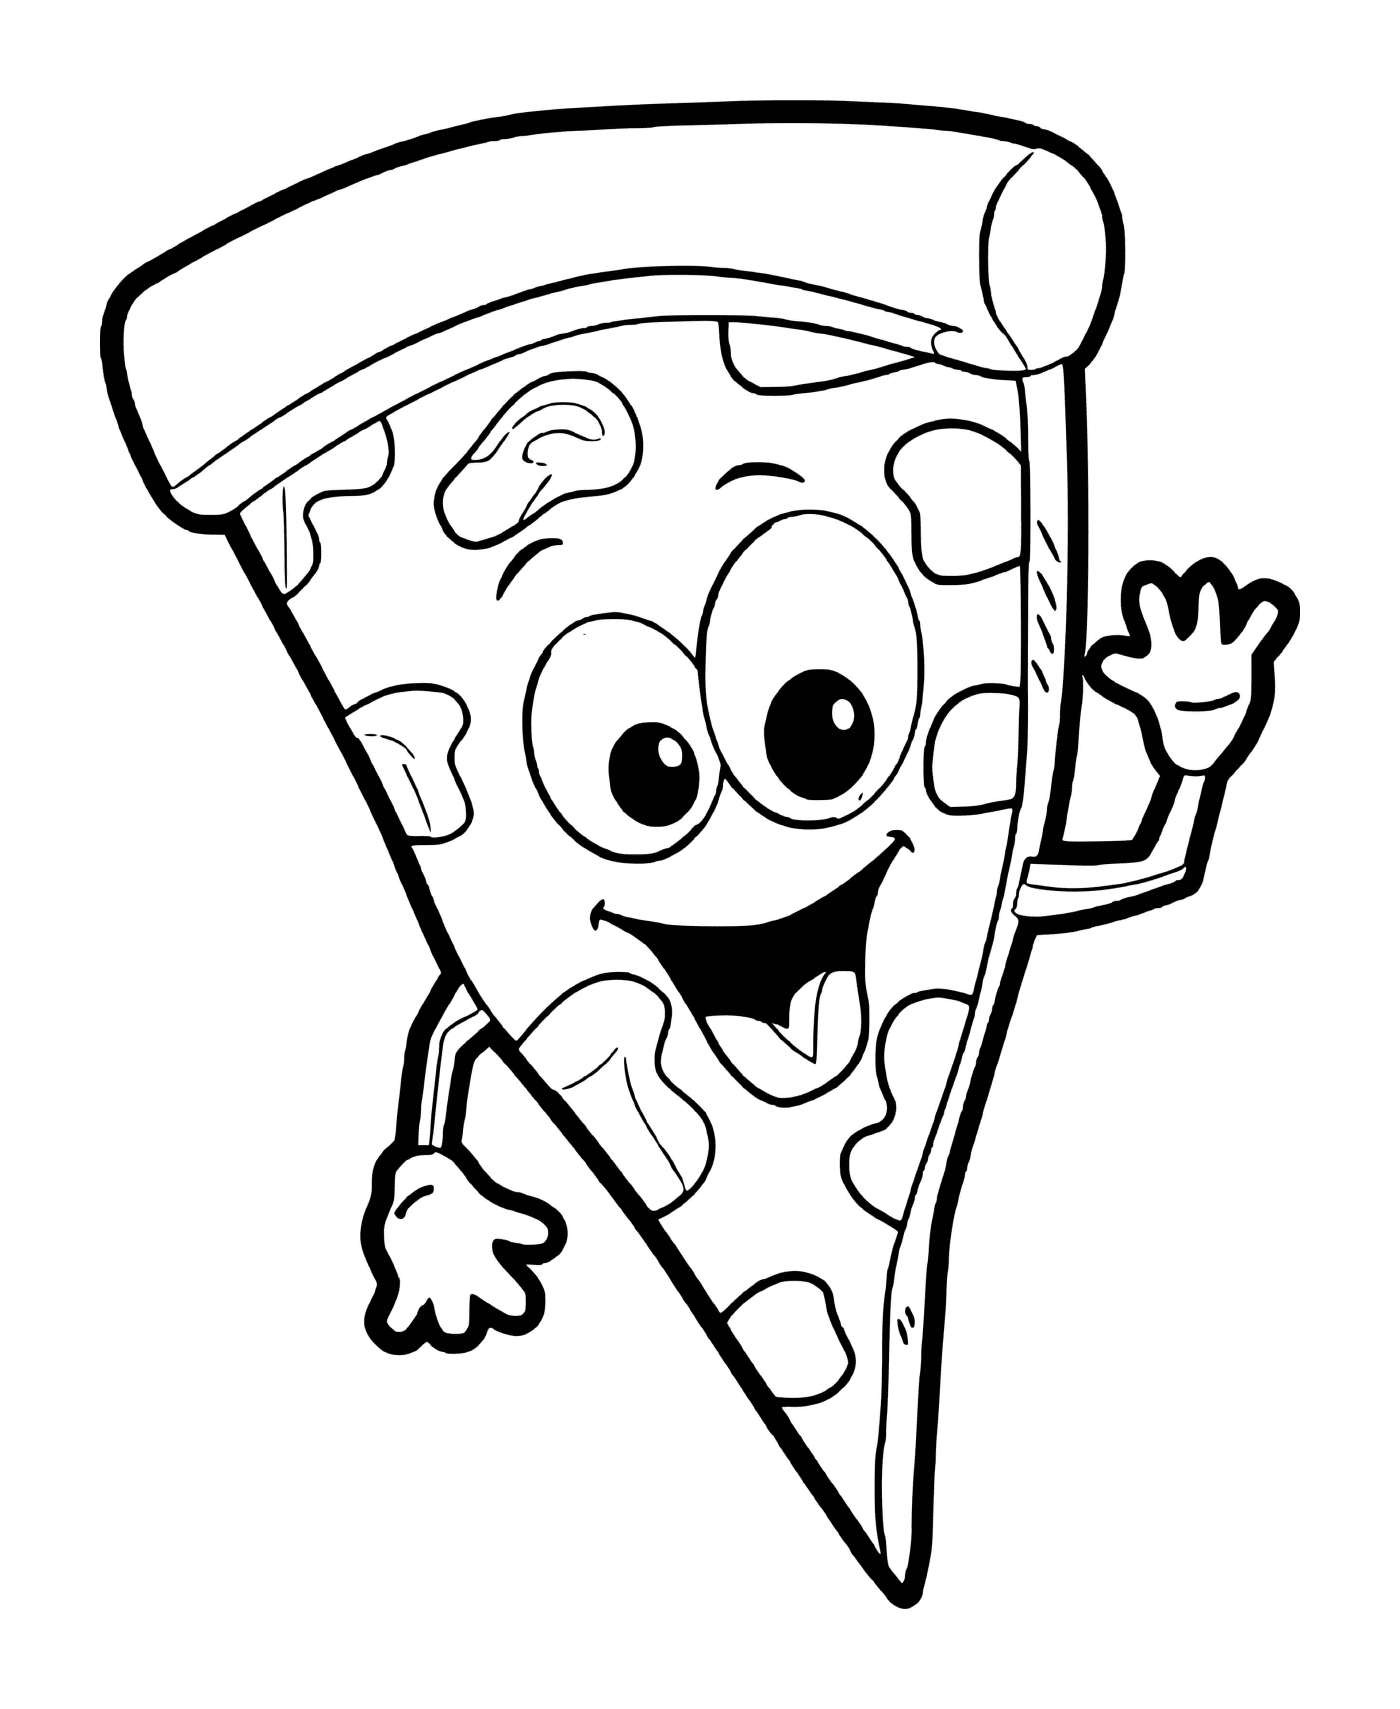  A funny and smiling pizza 